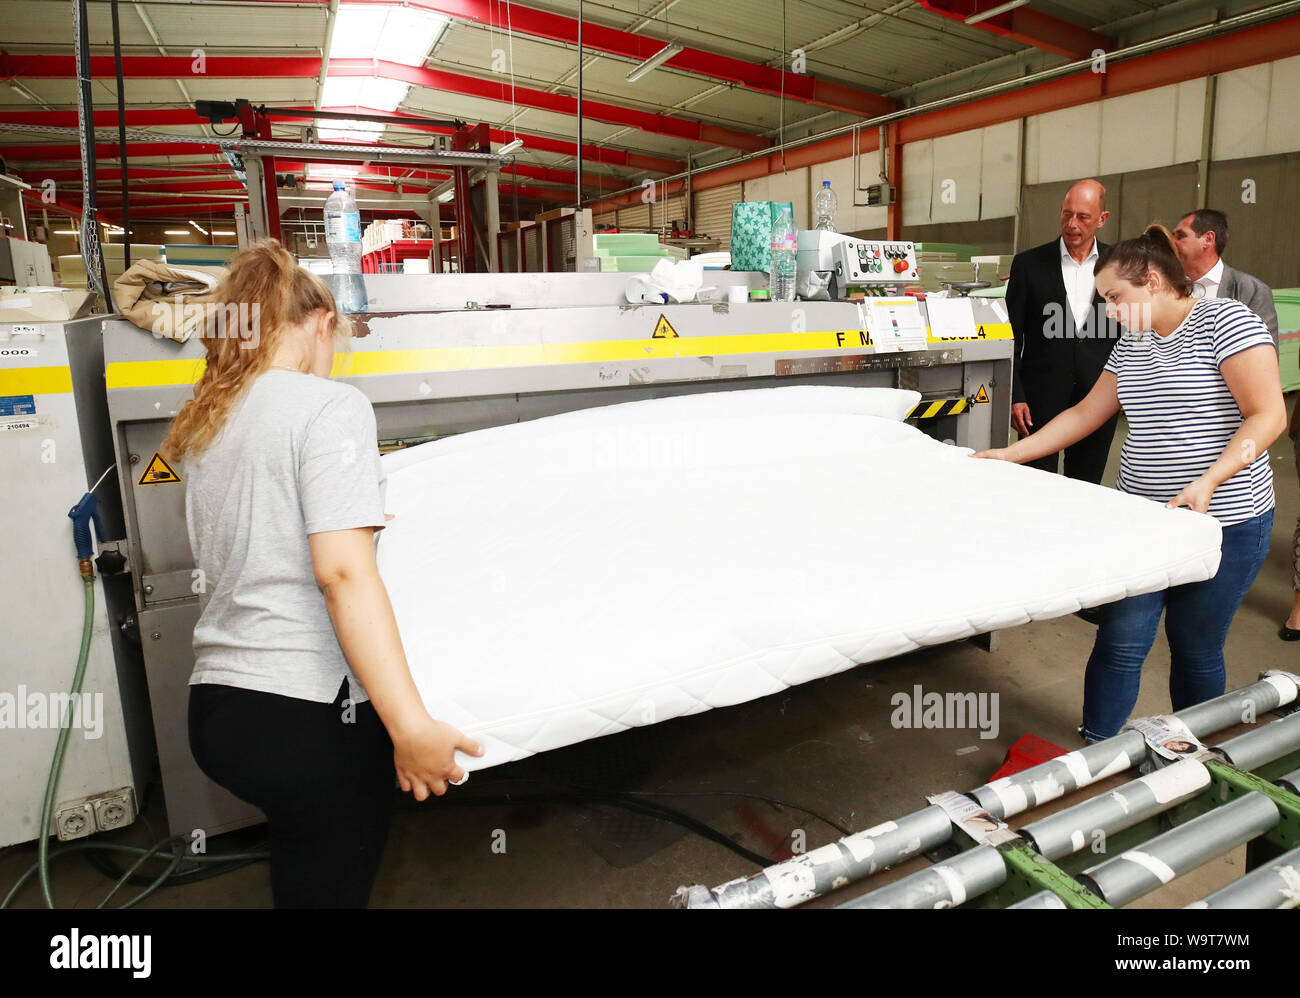 Weida, Germany. 15th Aug, 2019. Thuringia's Economics Minister Wolfgang  Tiefensee (SPD) visits Breckle Matratzenwerk Weida GmbH and observes two  employees closing the cover of a foam mattress. Credit: Bodo  Schackow/dpa-Zentralbild/dpa/Alamy Live News